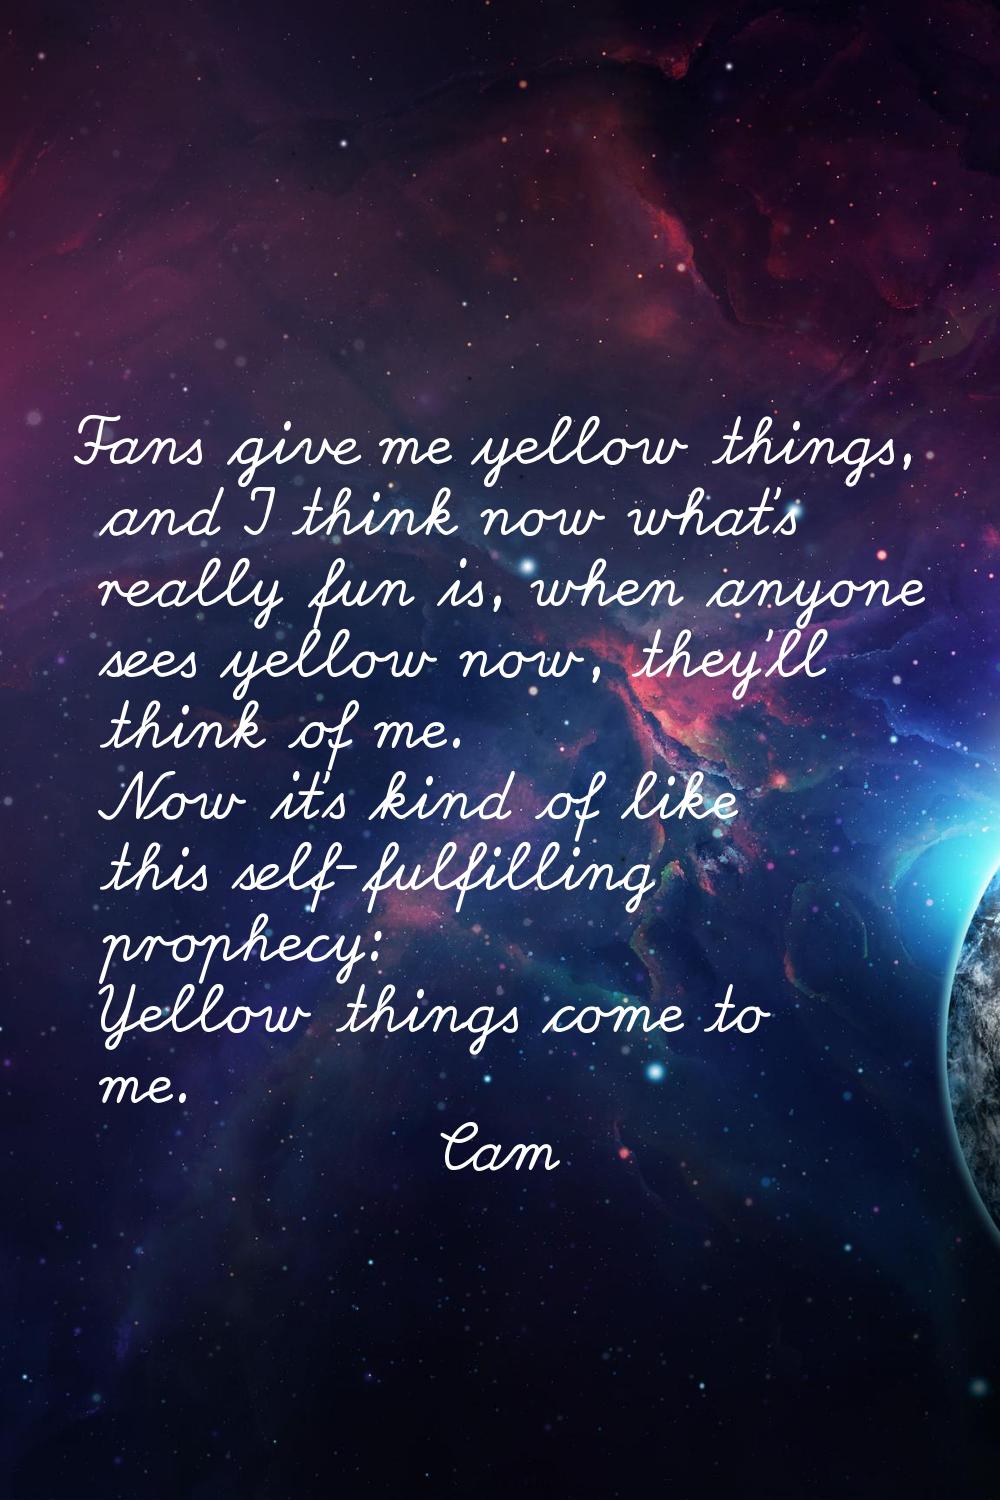 Fans give me yellow things, and I think now what's really fun is, when anyone sees yellow now, they